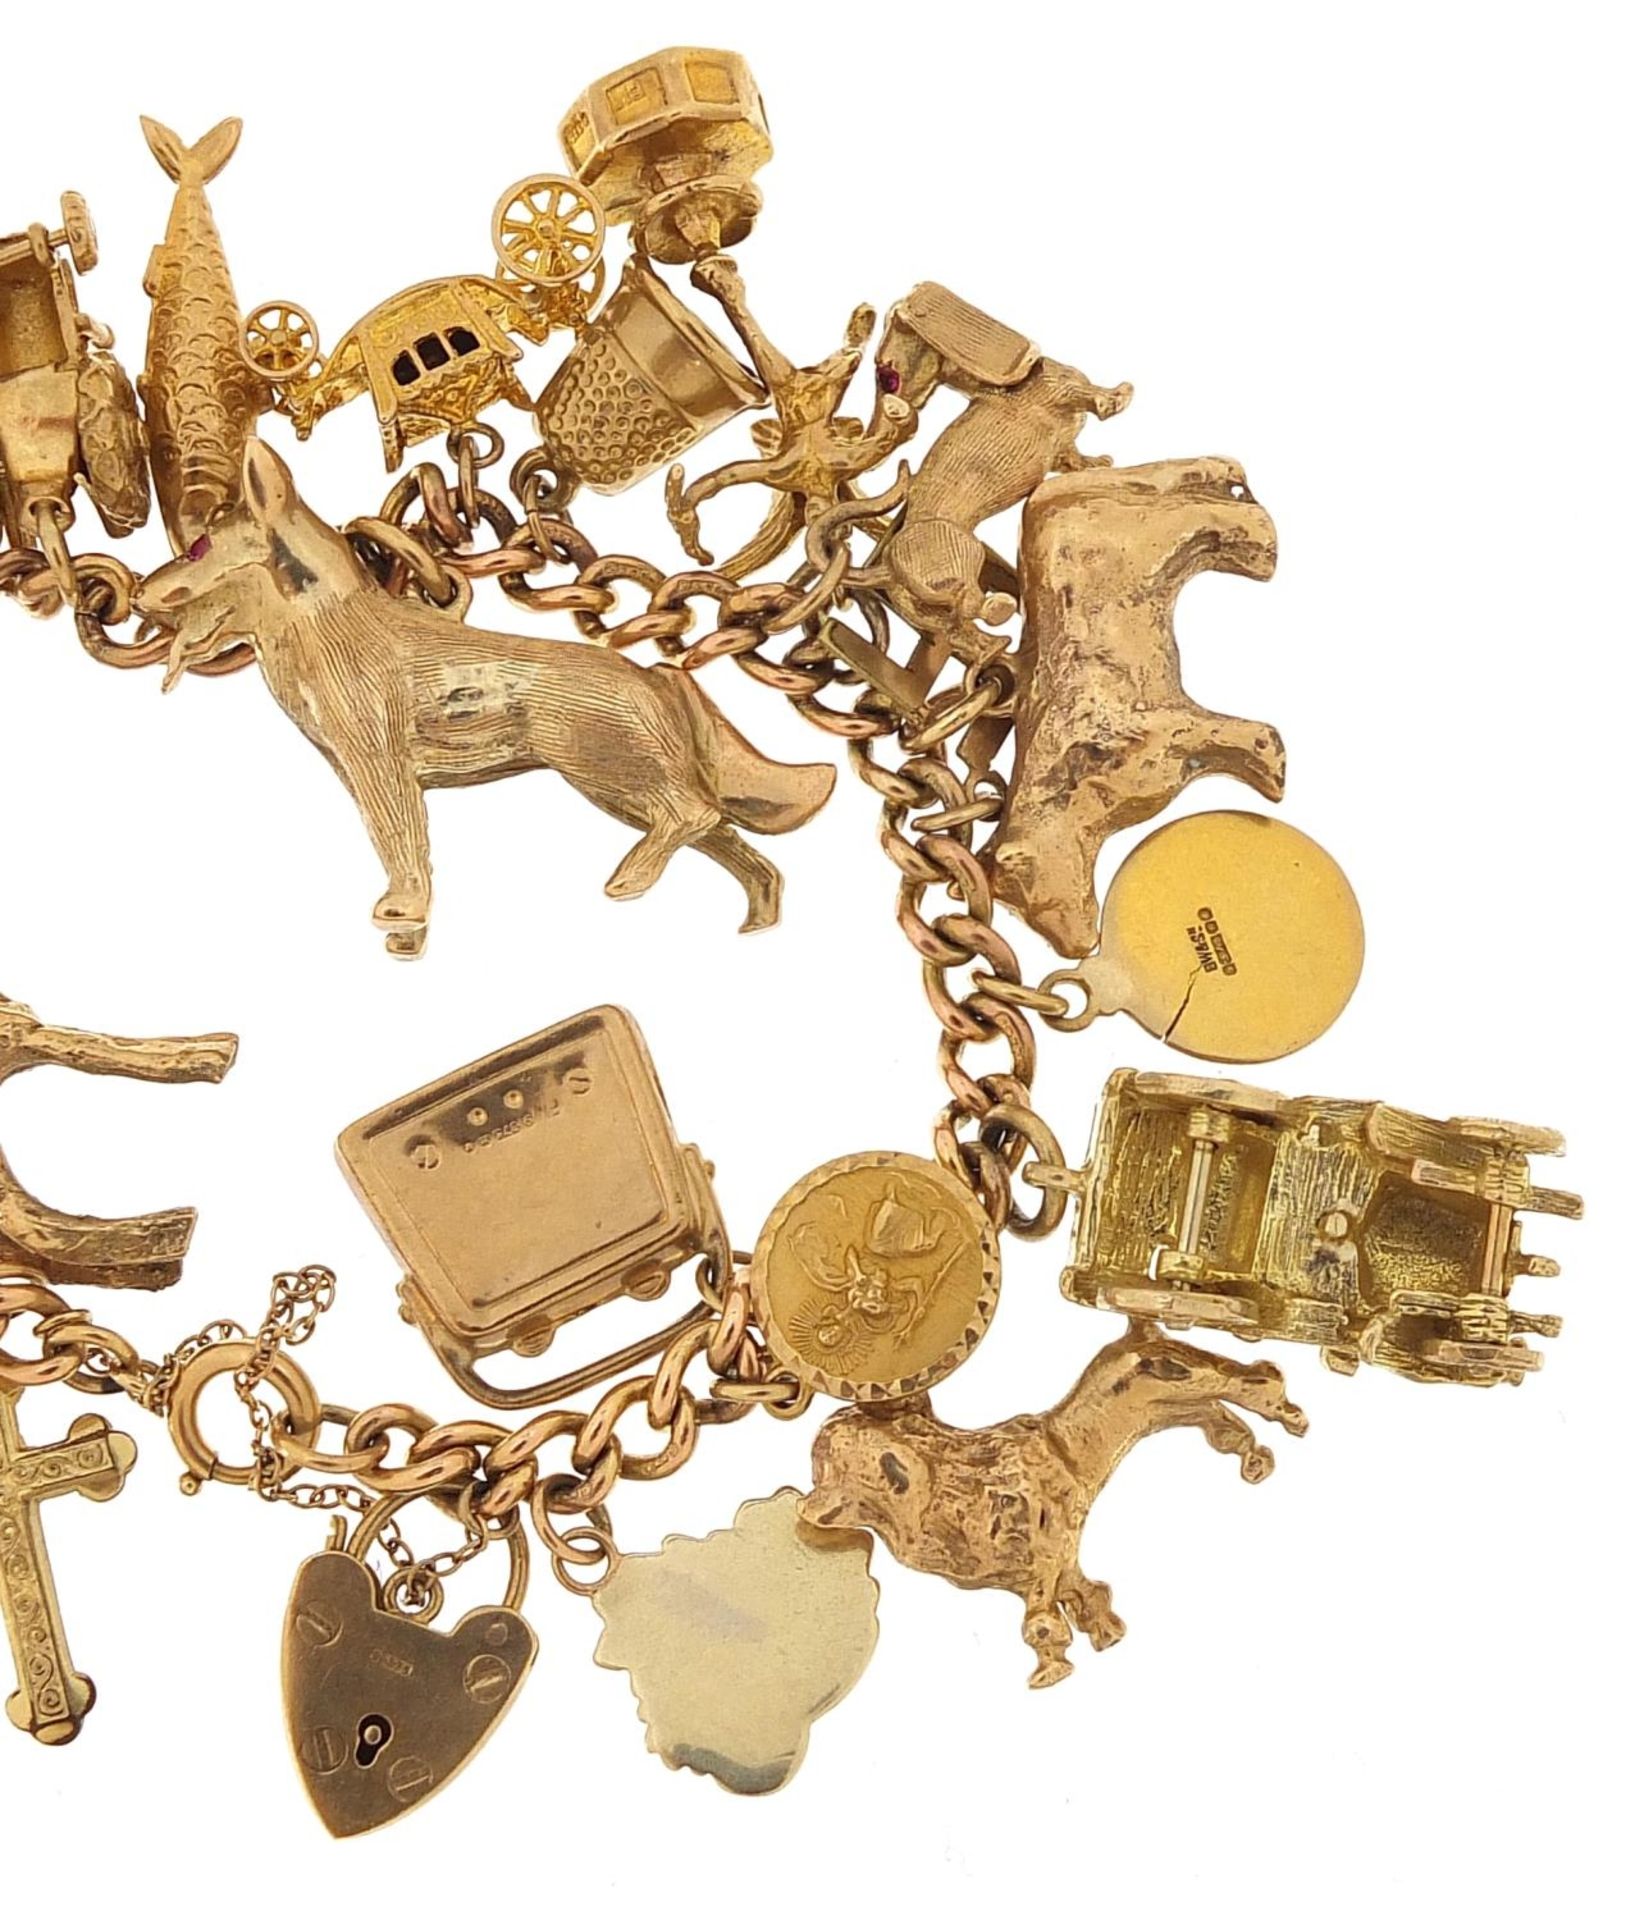 9ct gold charm bracelet with a large selection of mostly 9ct gold charms including Alsatian dog, - Image 6 of 7